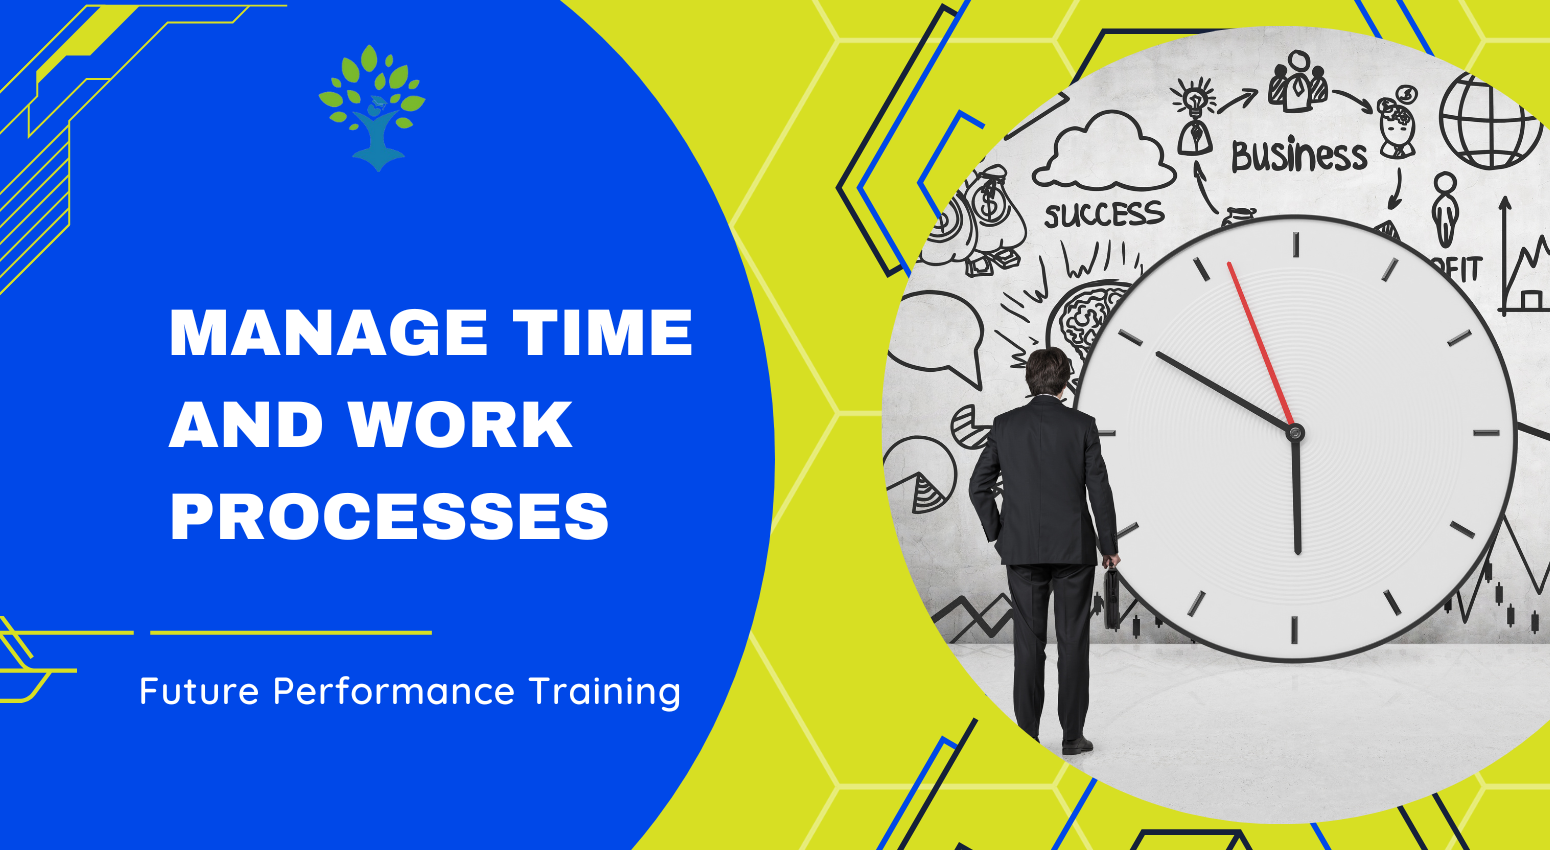 Manage Time and Work Processes 